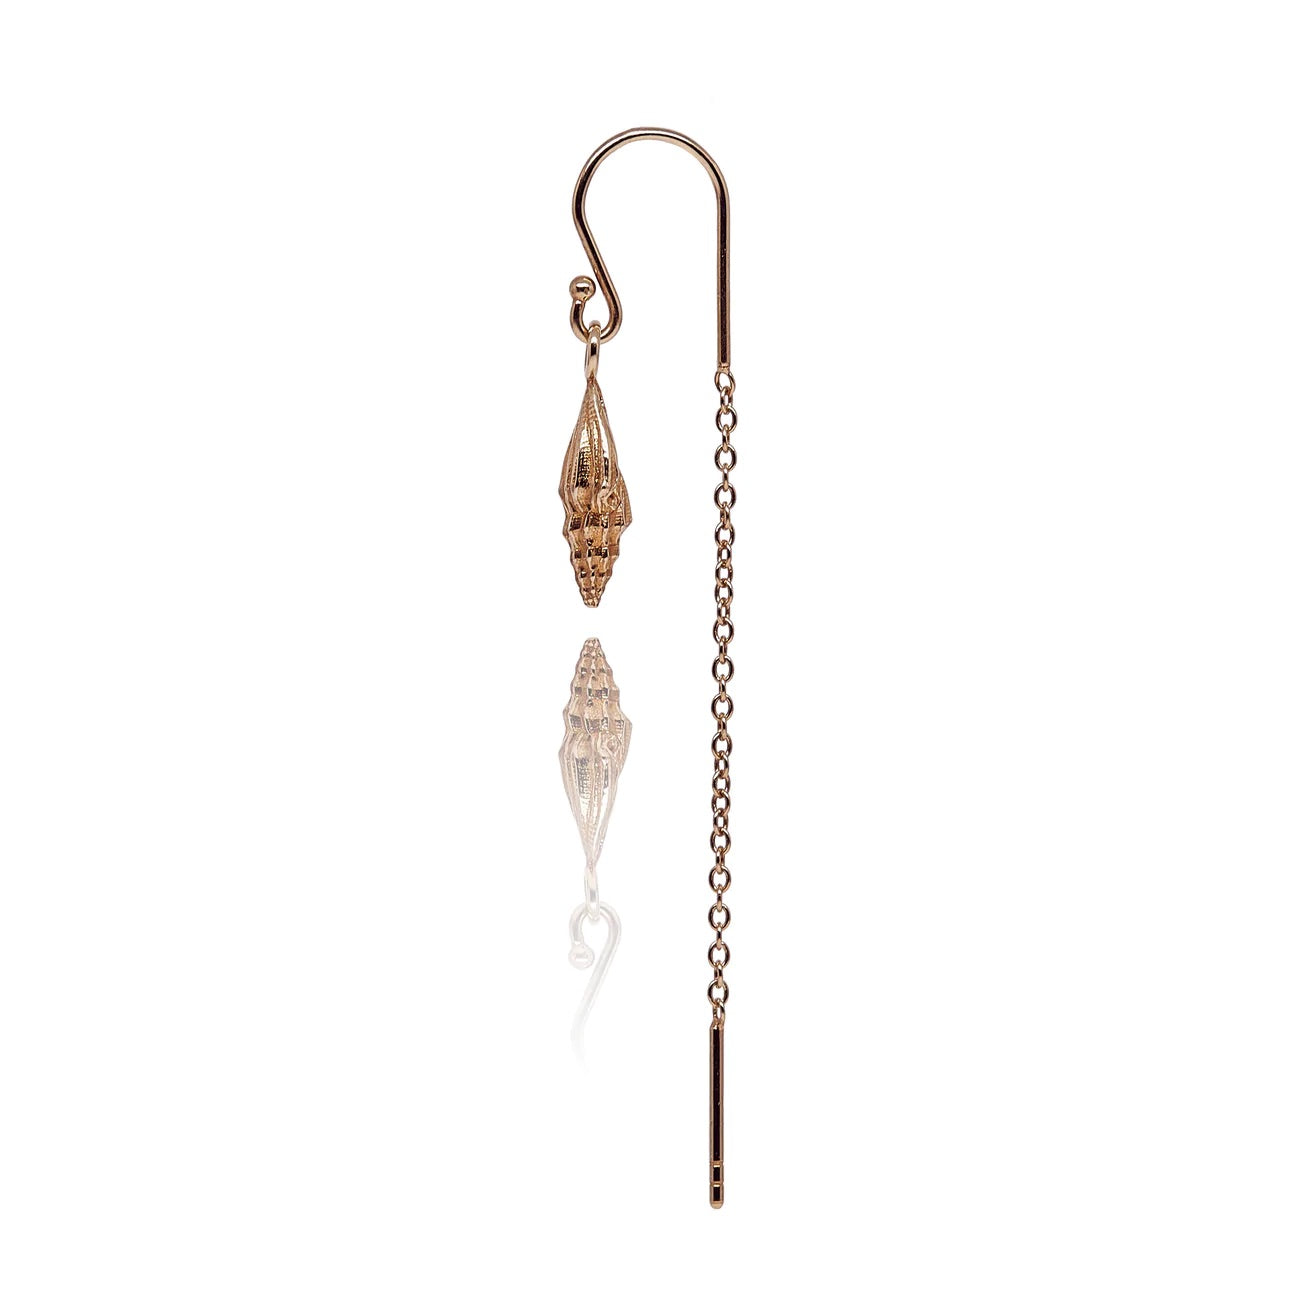 Gili Shell Earring -  Gold Plated Silver